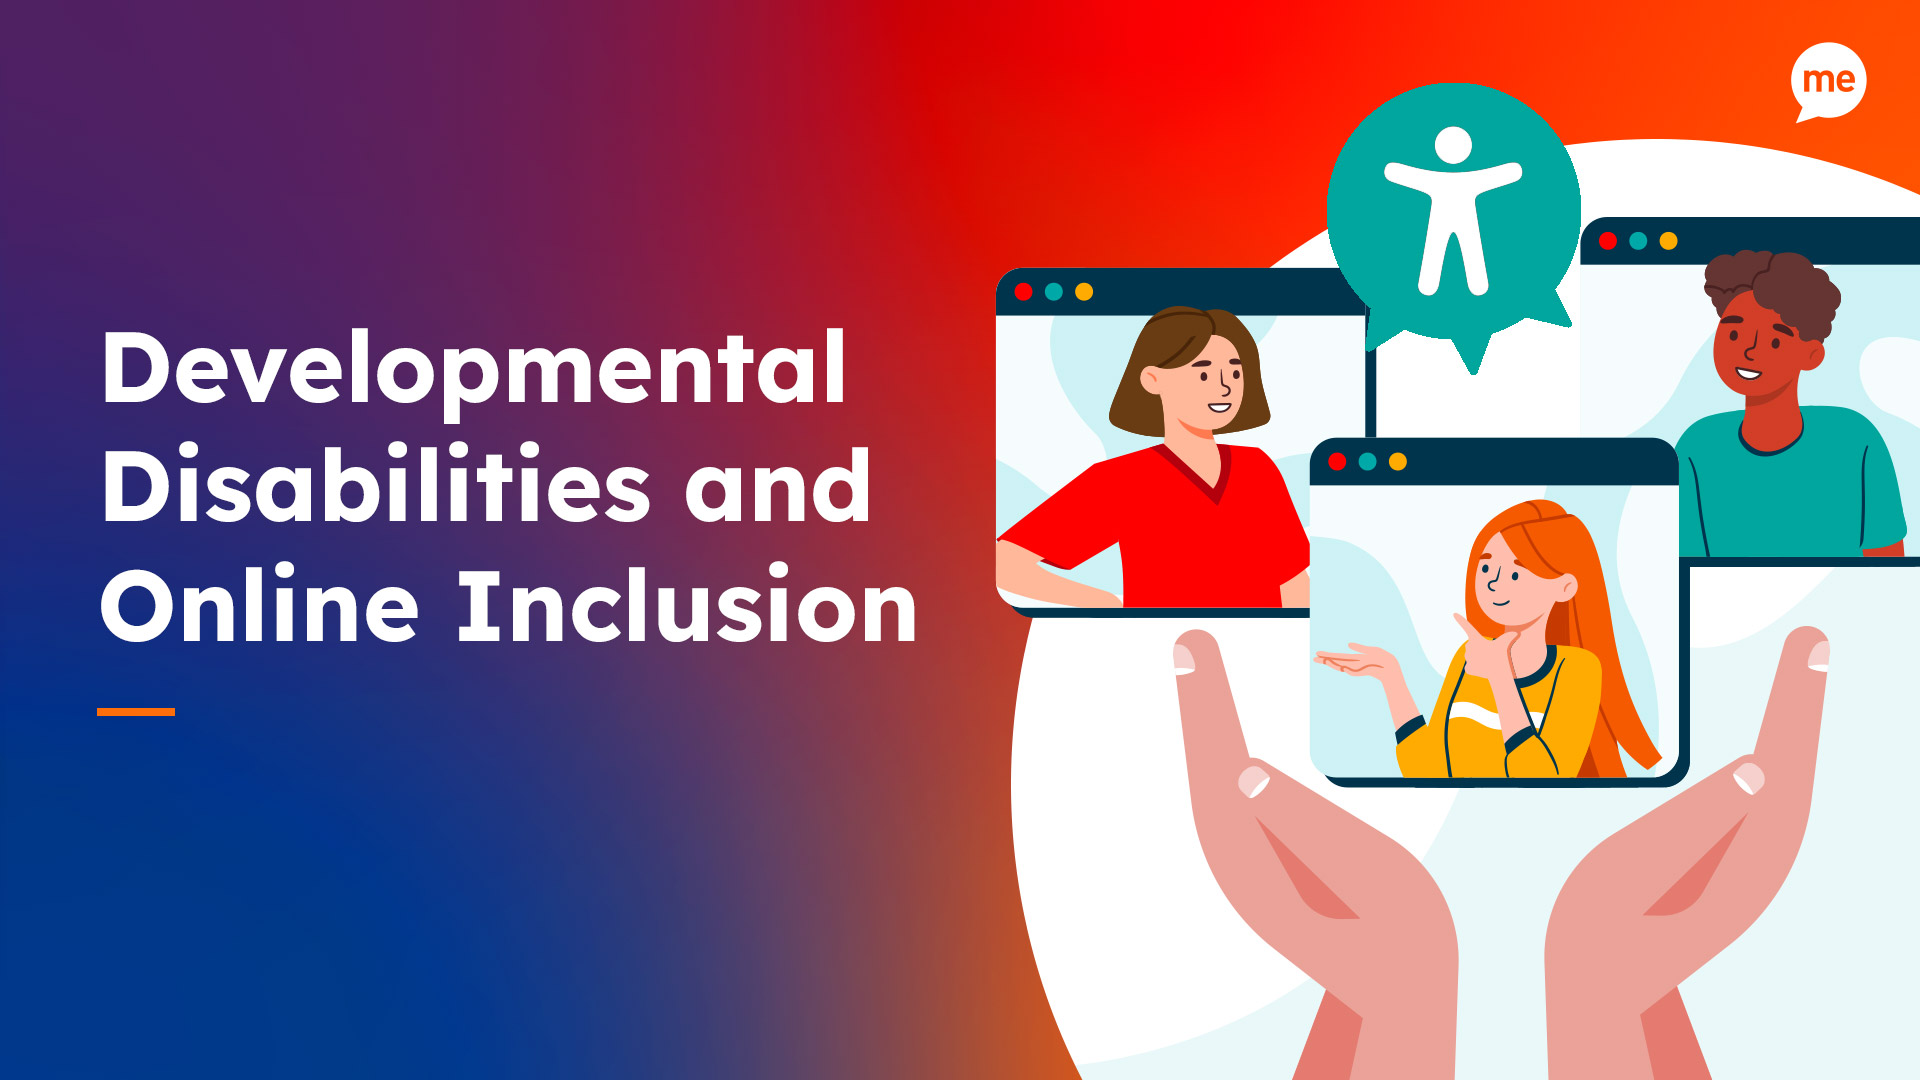 Developmental Disabilities and Online Inclusion with an thumbnail image of a hands raised up and 3 screens with 2 young women and a young man talking.